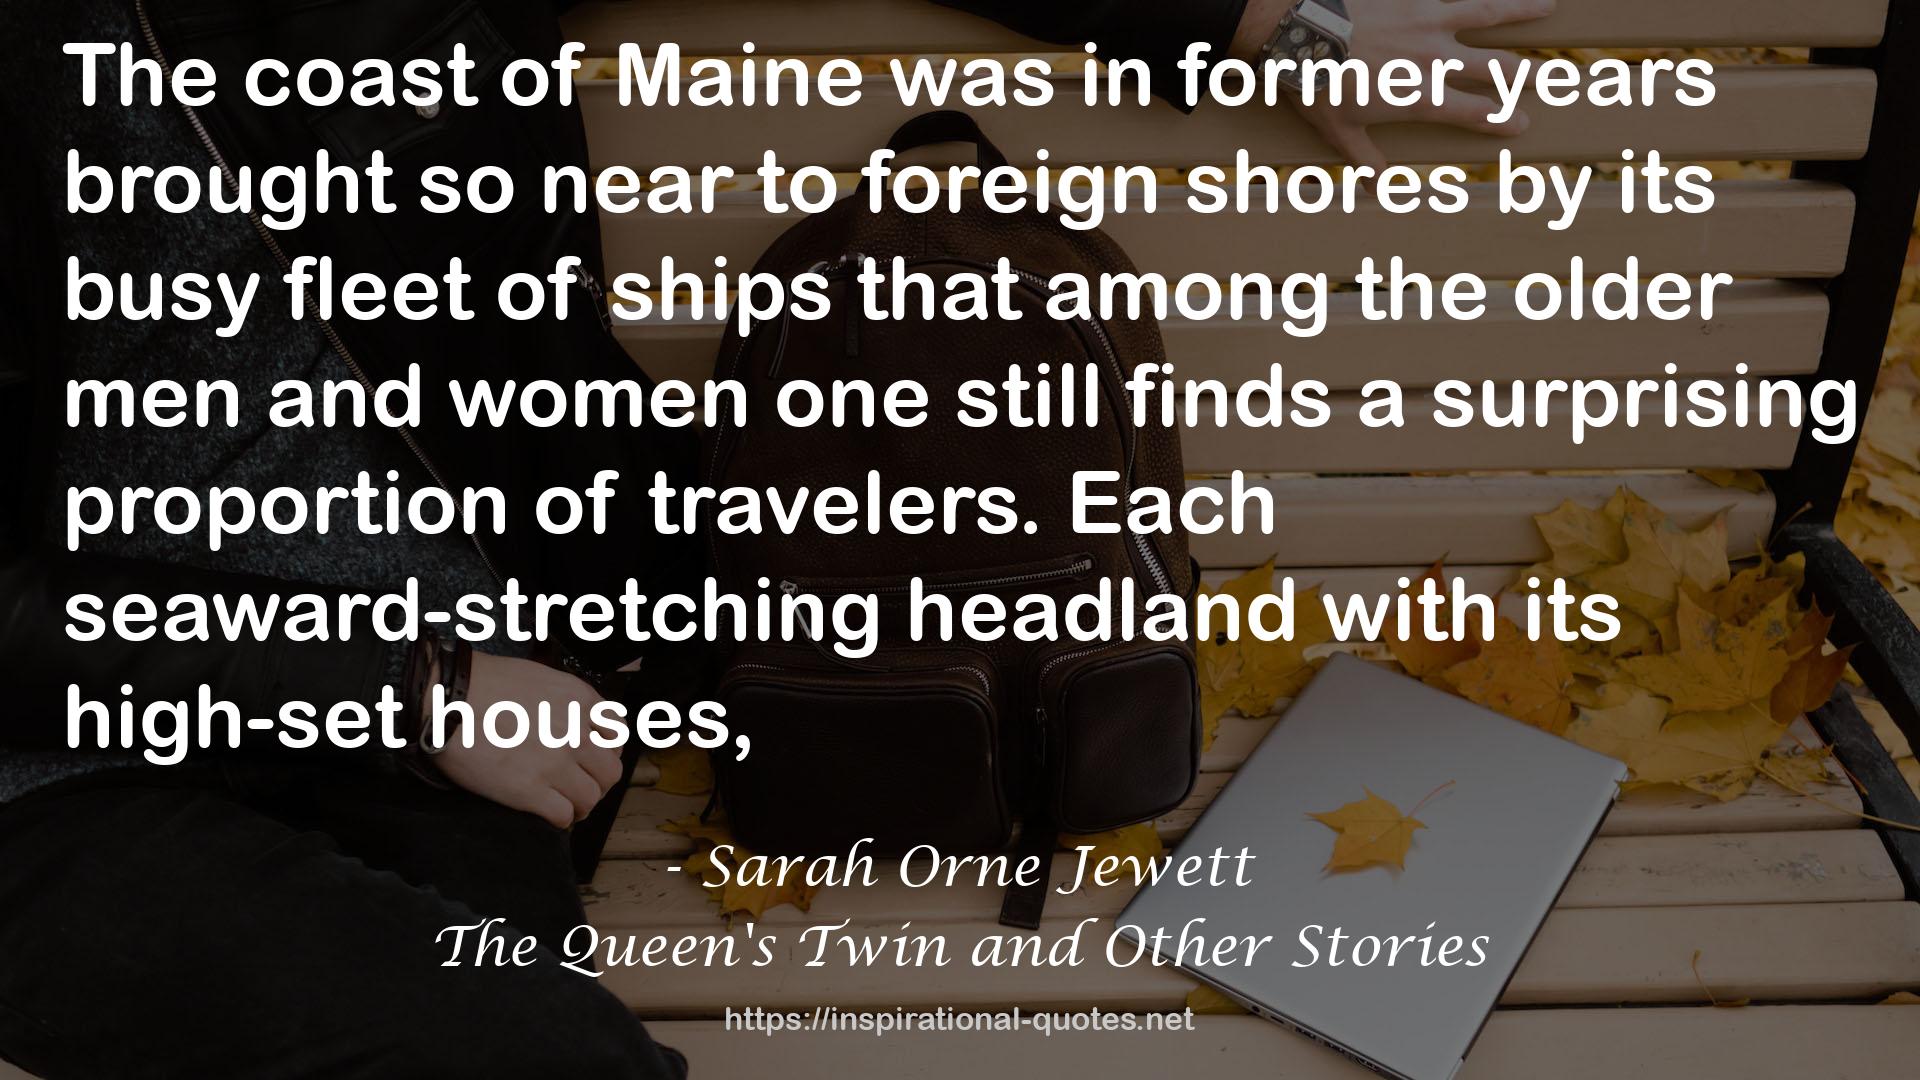 The Queen's Twin and Other Stories QUOTES